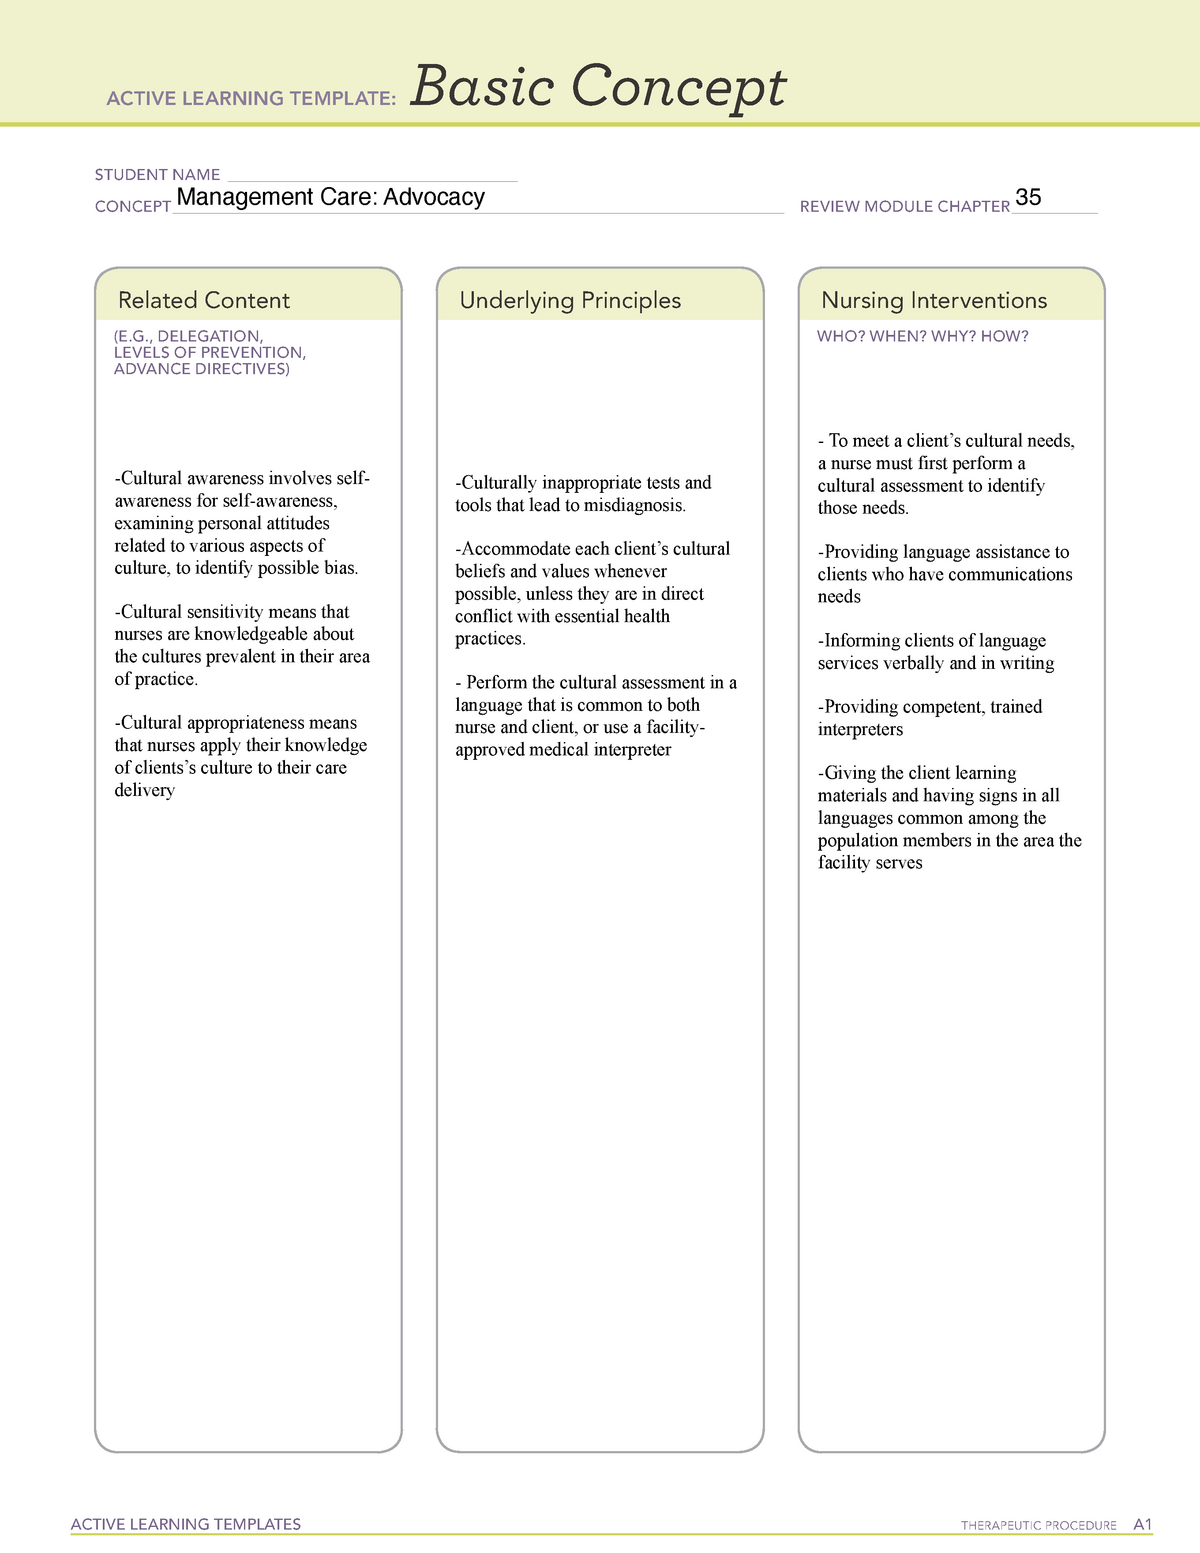 active-learning-template-basic-concept-management-care-1-active